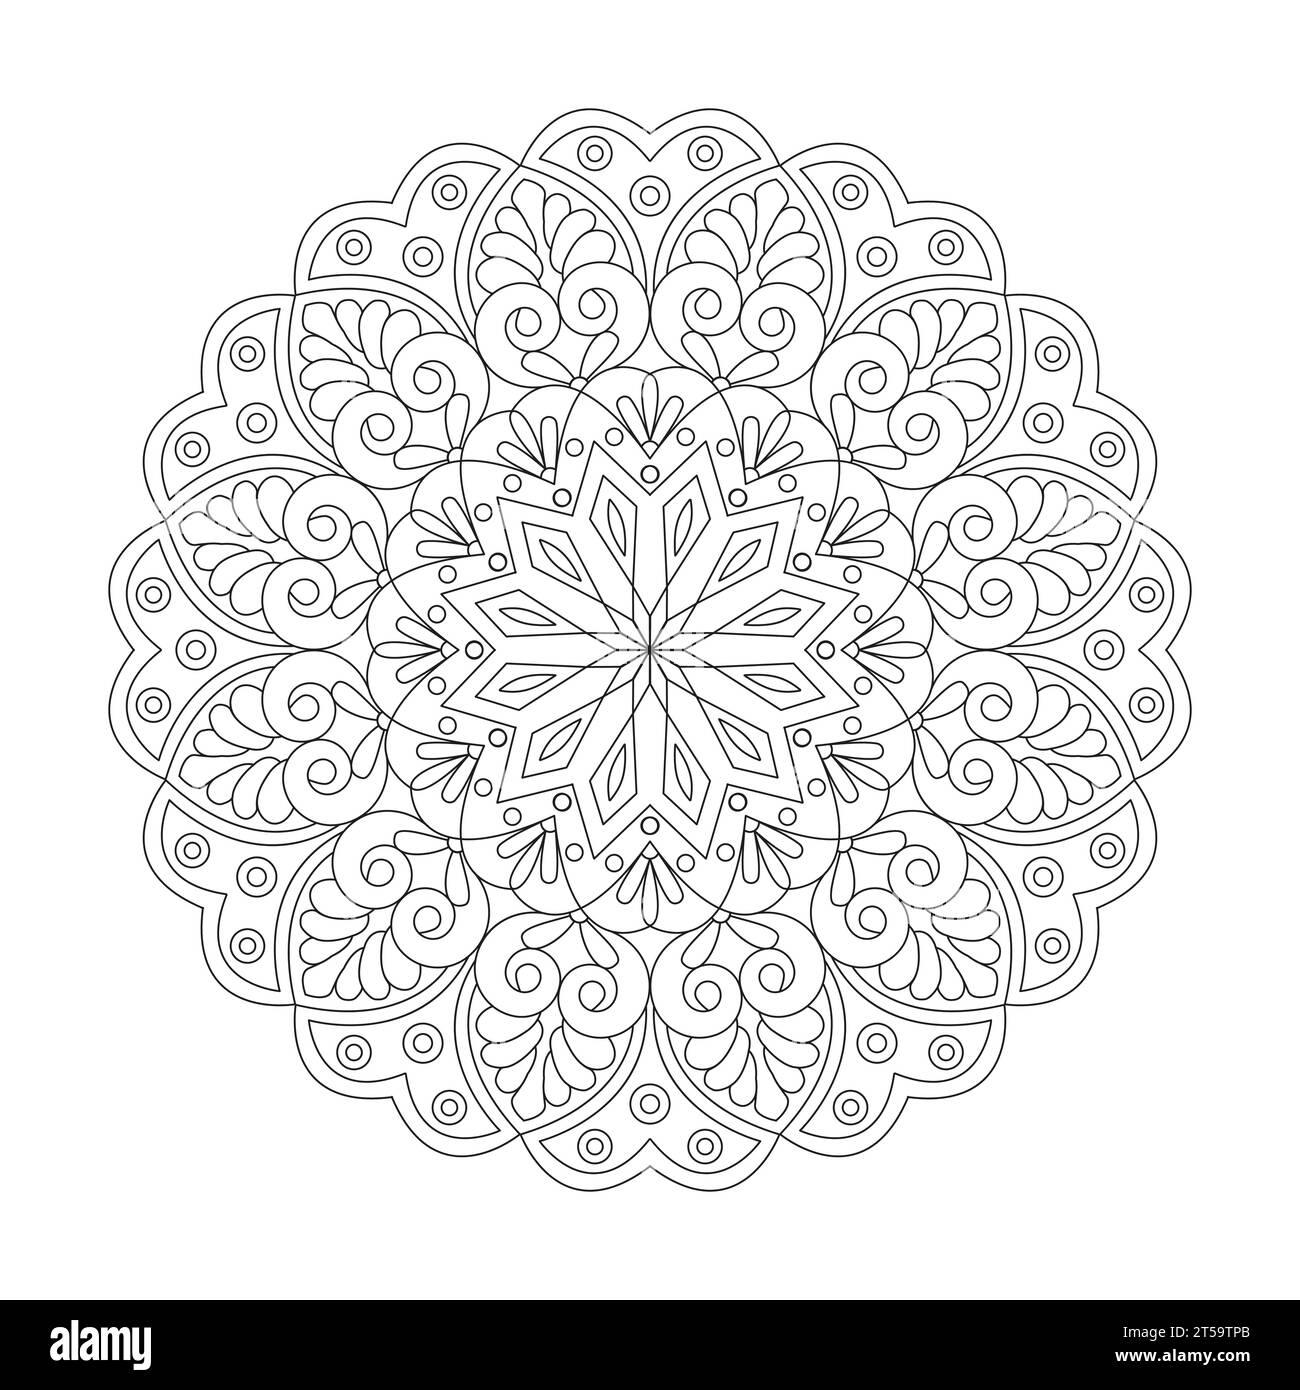 Paisley Dreams Adult colouring book mandala page for KDP book interior. Peaceful Petals, Ability to Relax, Brain Experiences, Harmonious Haven, Peaceful Stock Vector